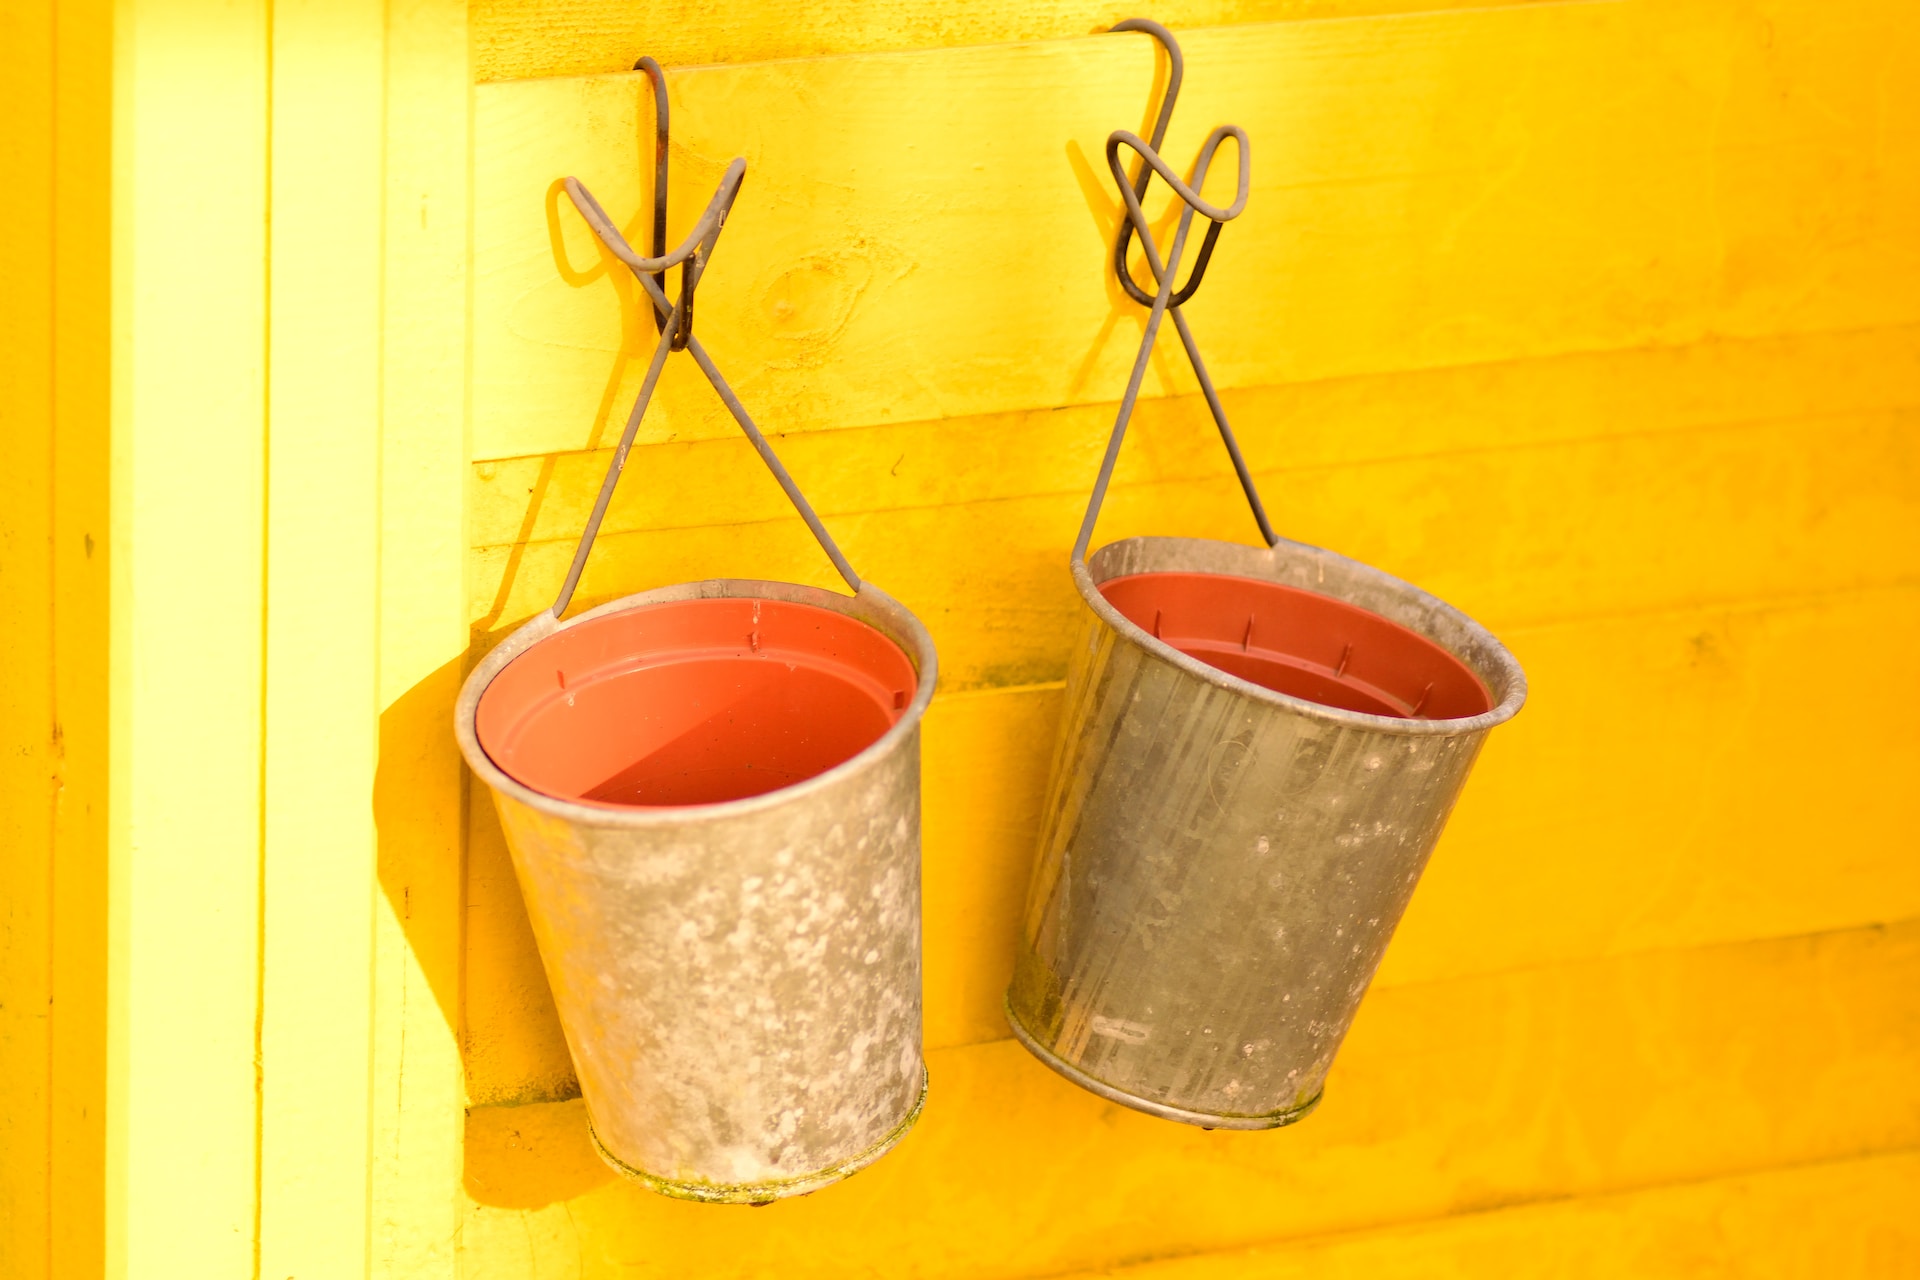 Two metal buckets hanging from hooks on a bright yellow wall